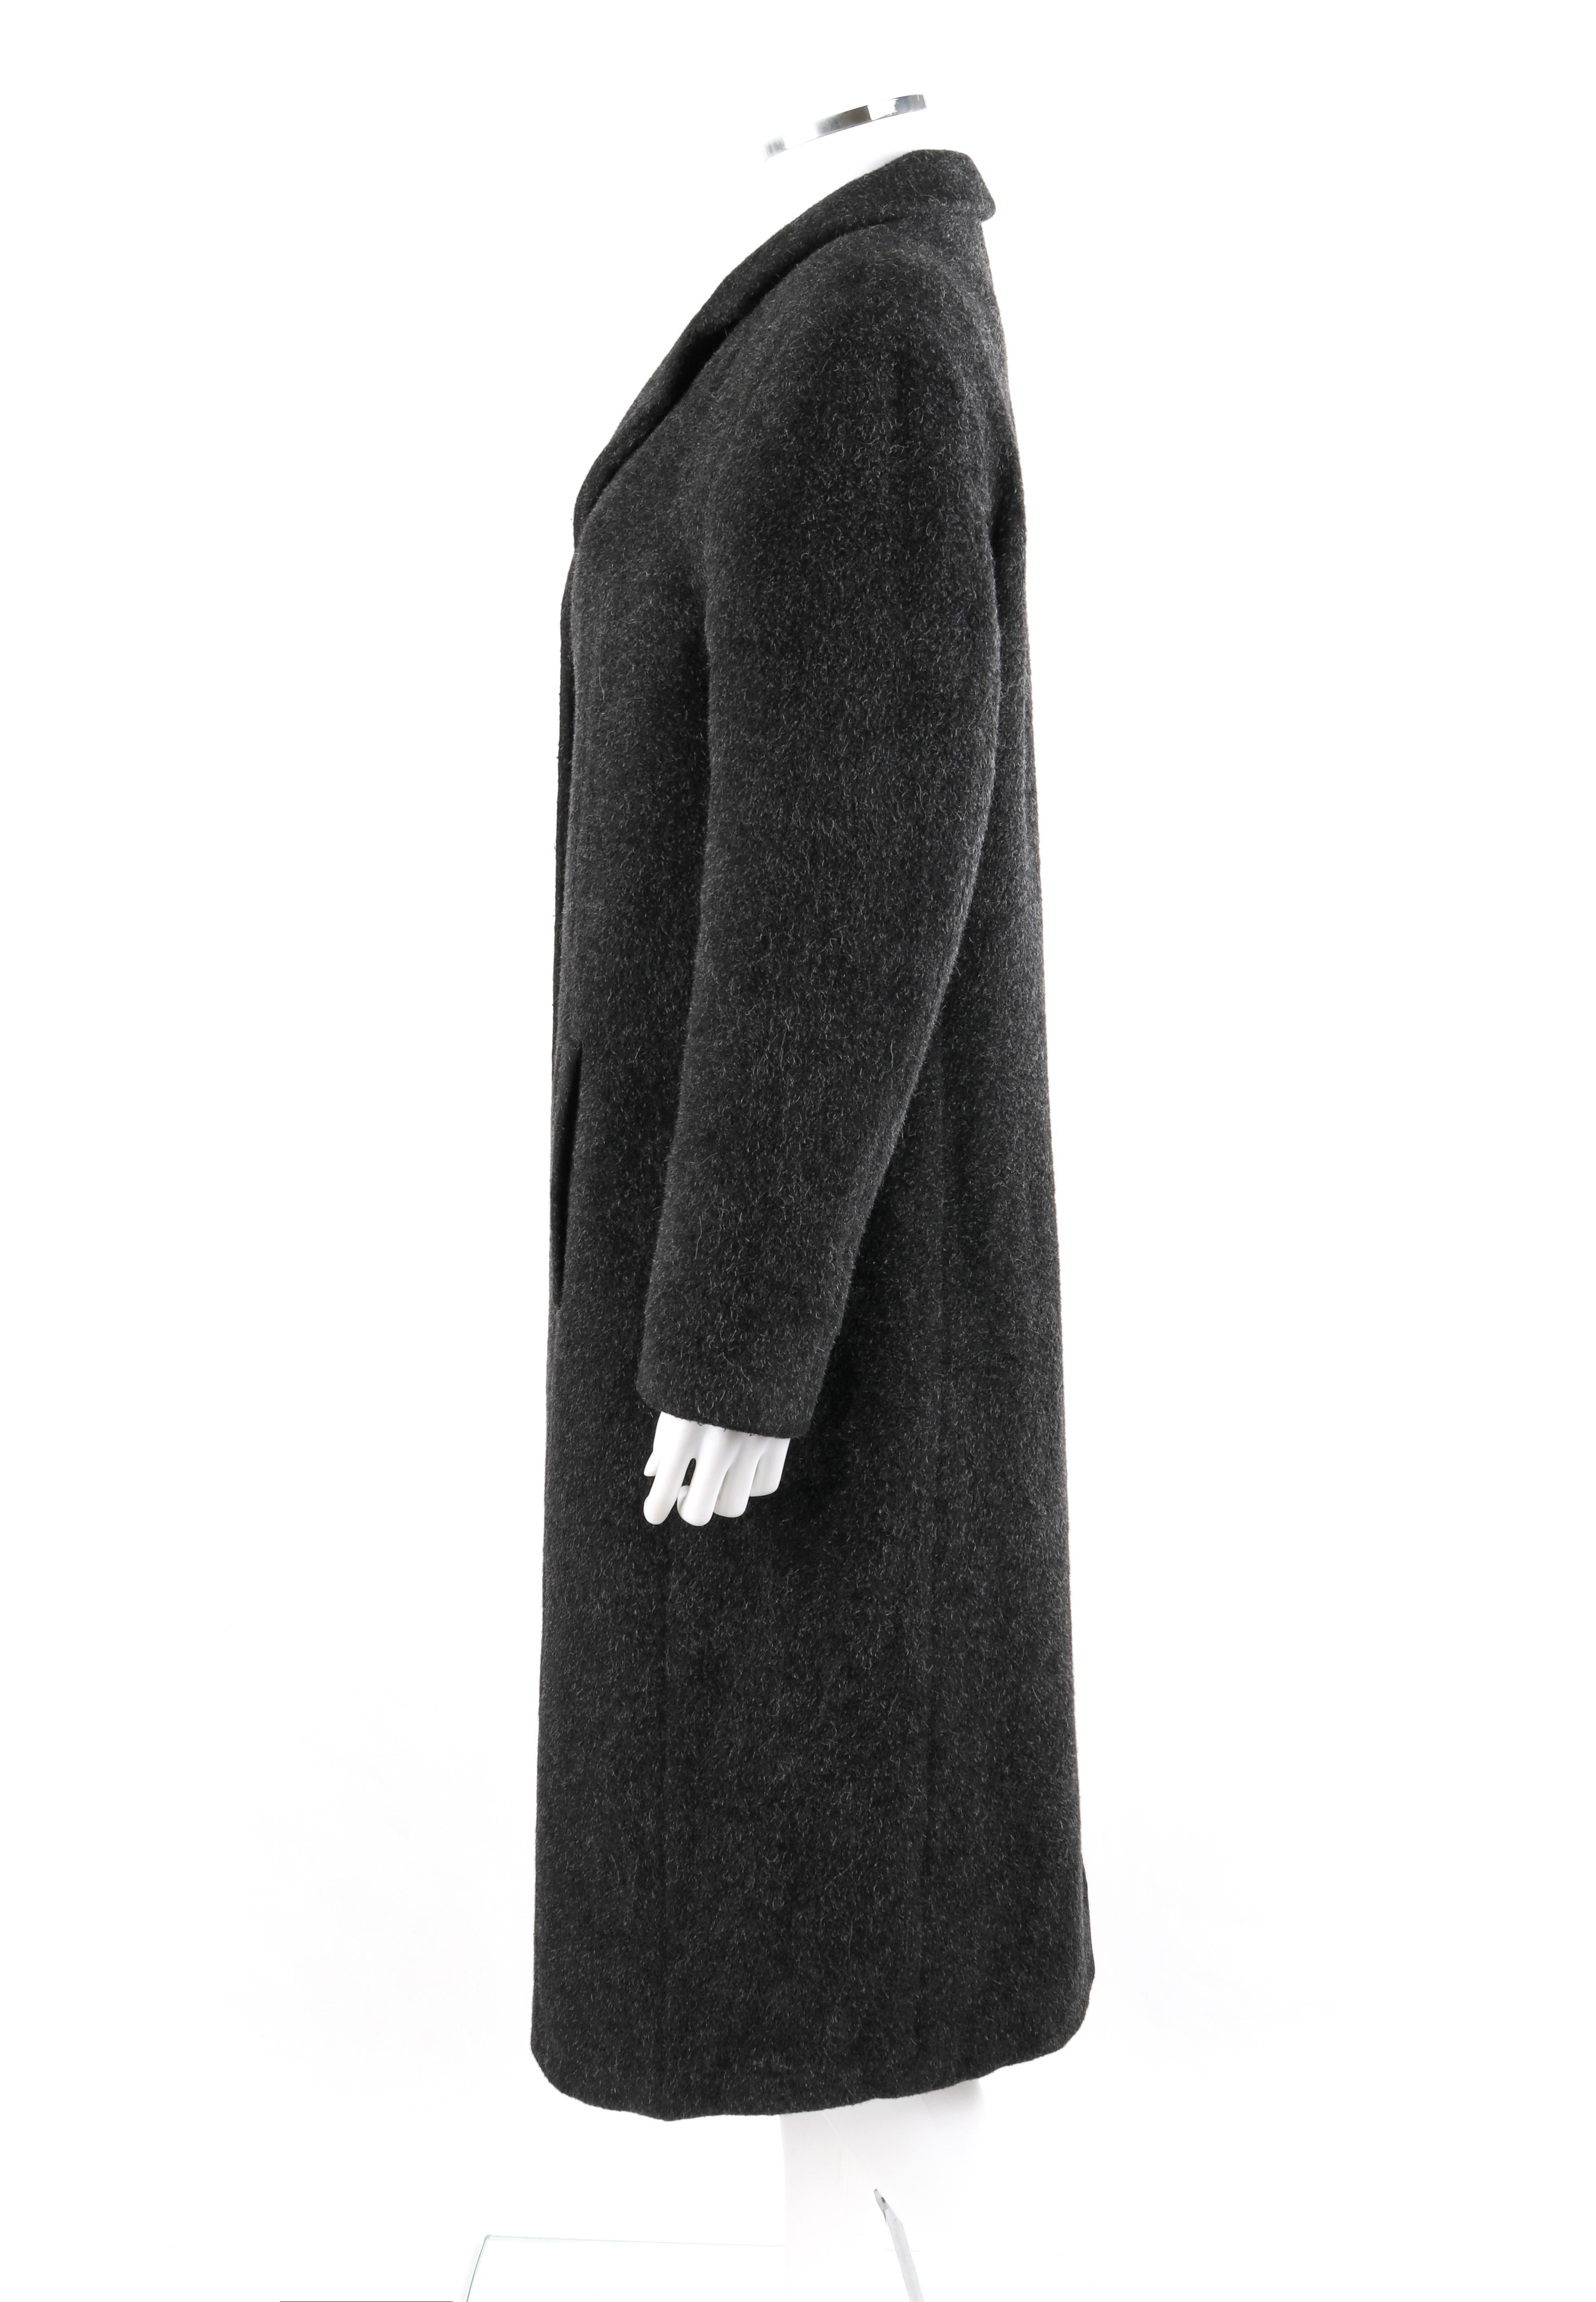 ALEXANDER McQUEEN A/W 1996 “Dante” Charcoal Gray Mohair Coat Button Up Overcoat  In Good Condition For Sale In Thiensville, WI